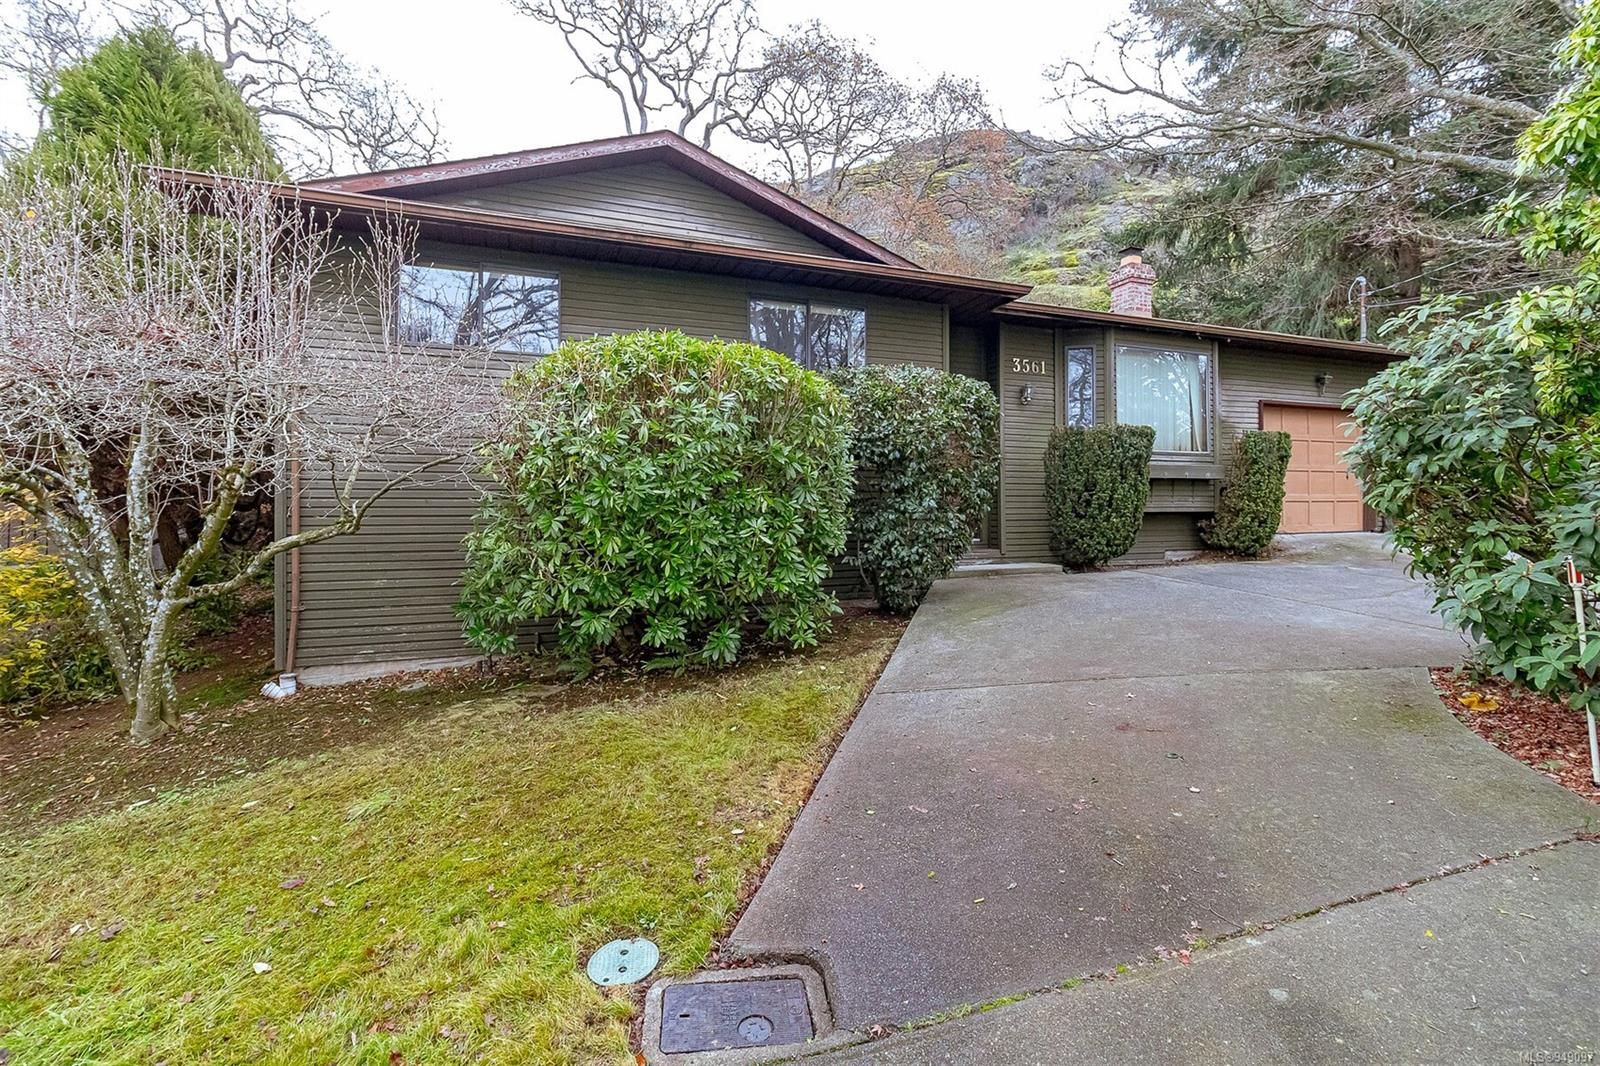 New property listed in SE Mt Tolmie, Saanich East